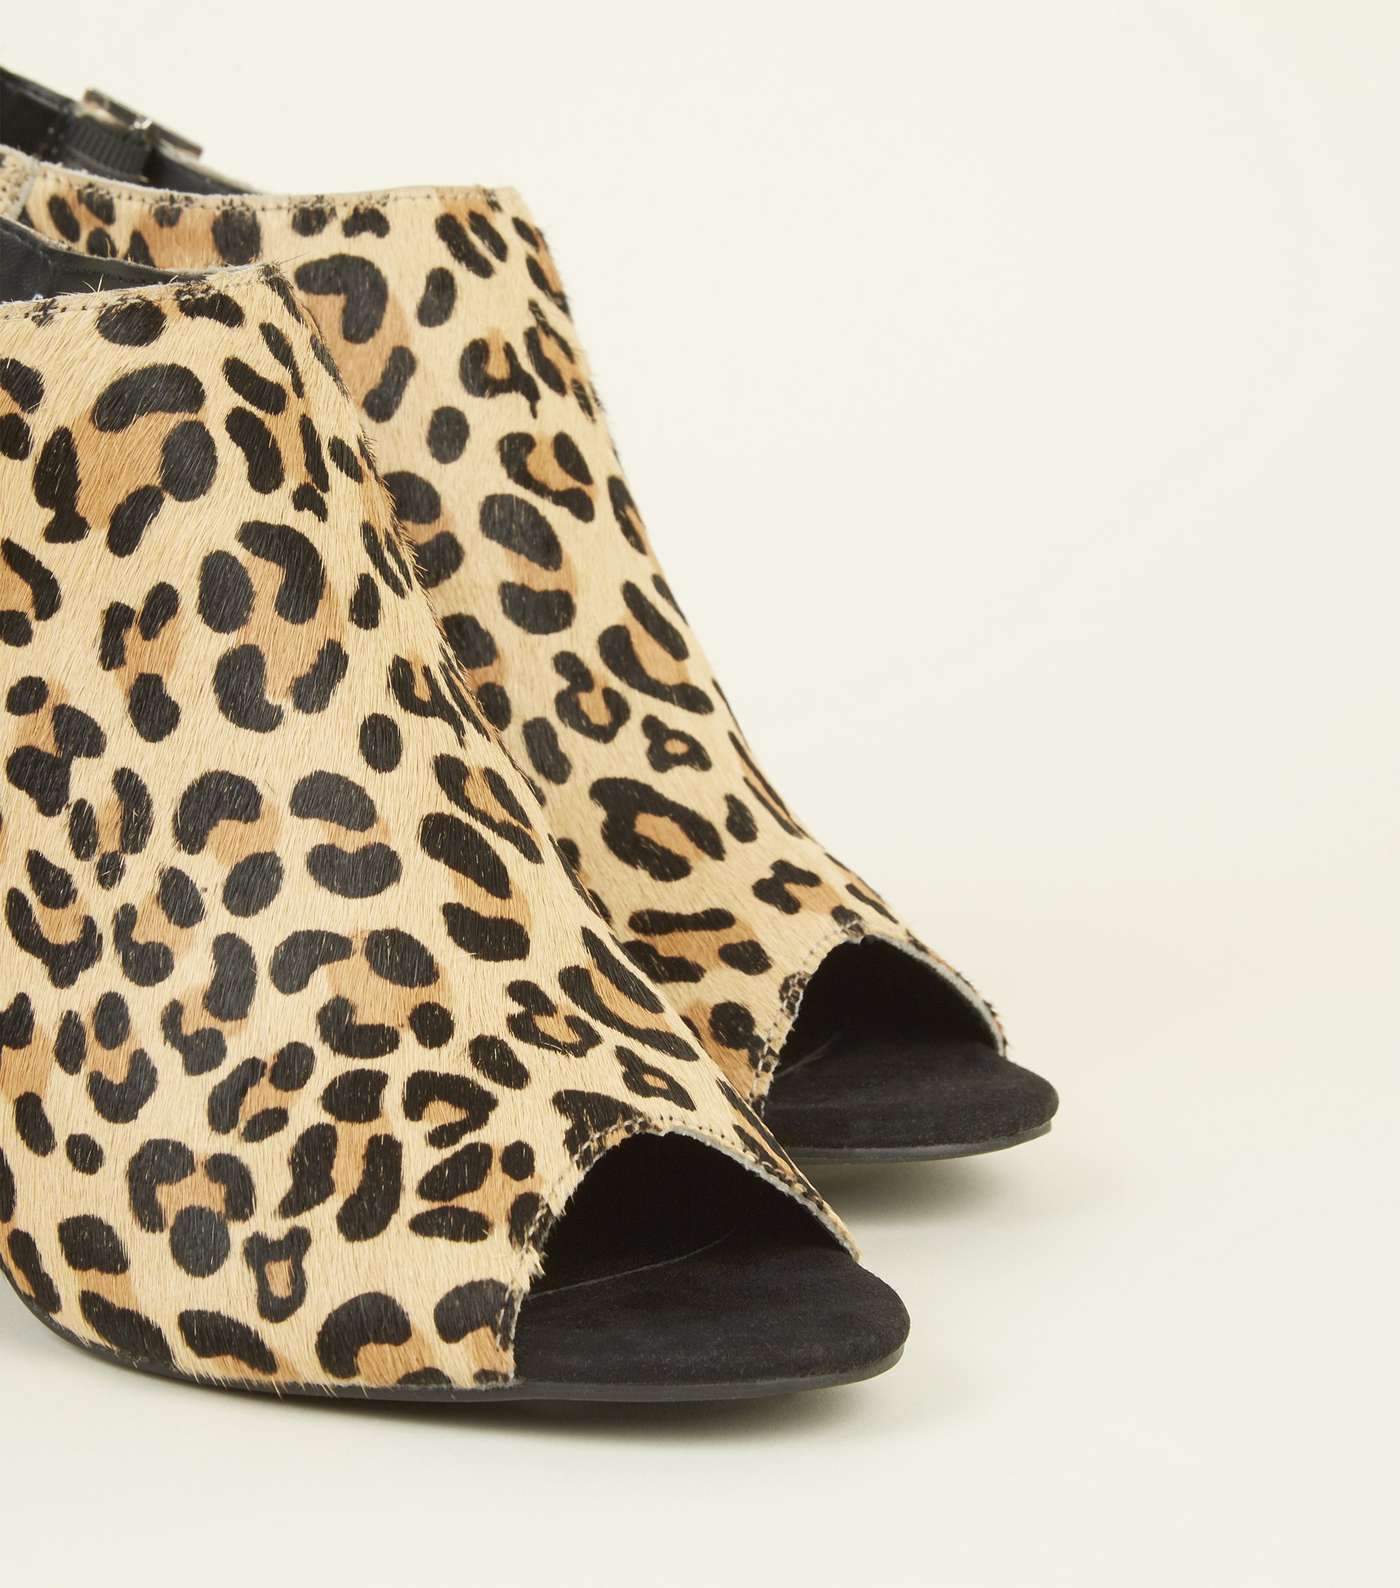 Tan Leather Faux Pony Hair Leopard Print Heels Image 3